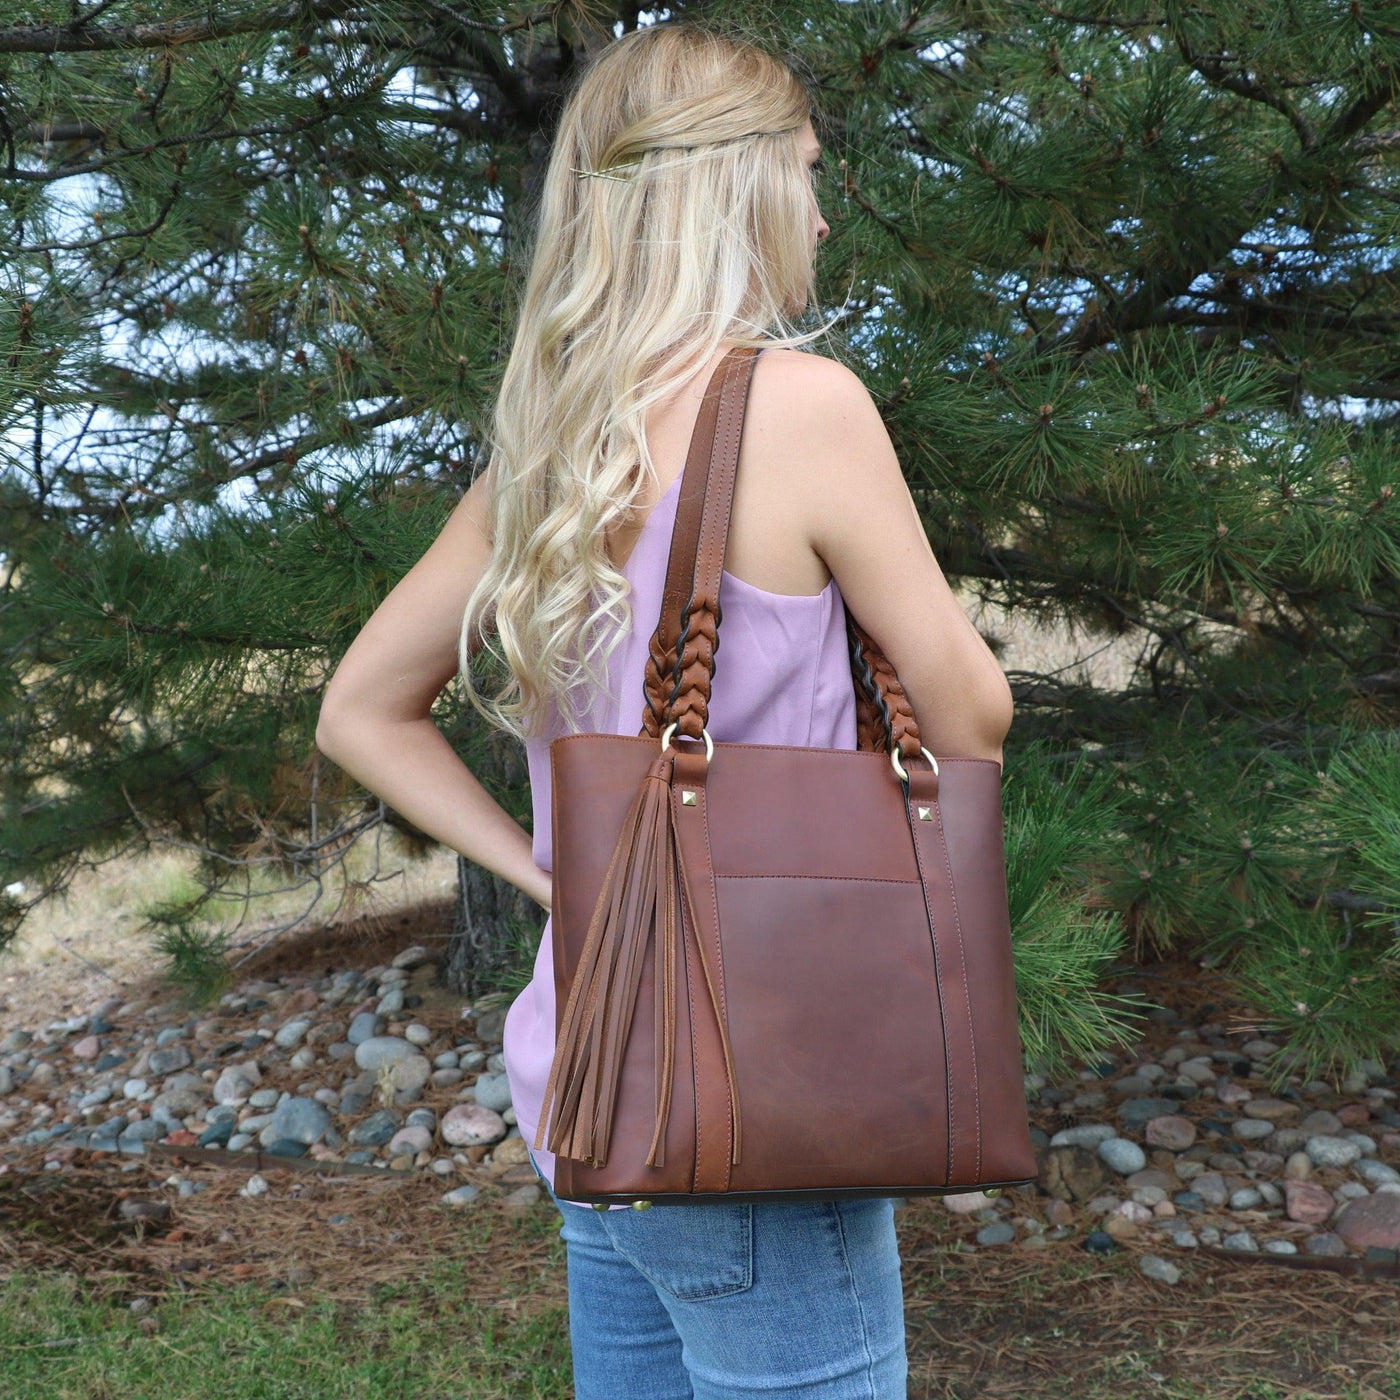 Concealed Carry Bella Leather Tote -  Women's Purse for Pistol - Locking Purse with pistol slot - Leather Conceal Carry purse for Women - Concealed carry purse holster -  Conceal Carry Handbag for Pistol - Handgun Bags for Women